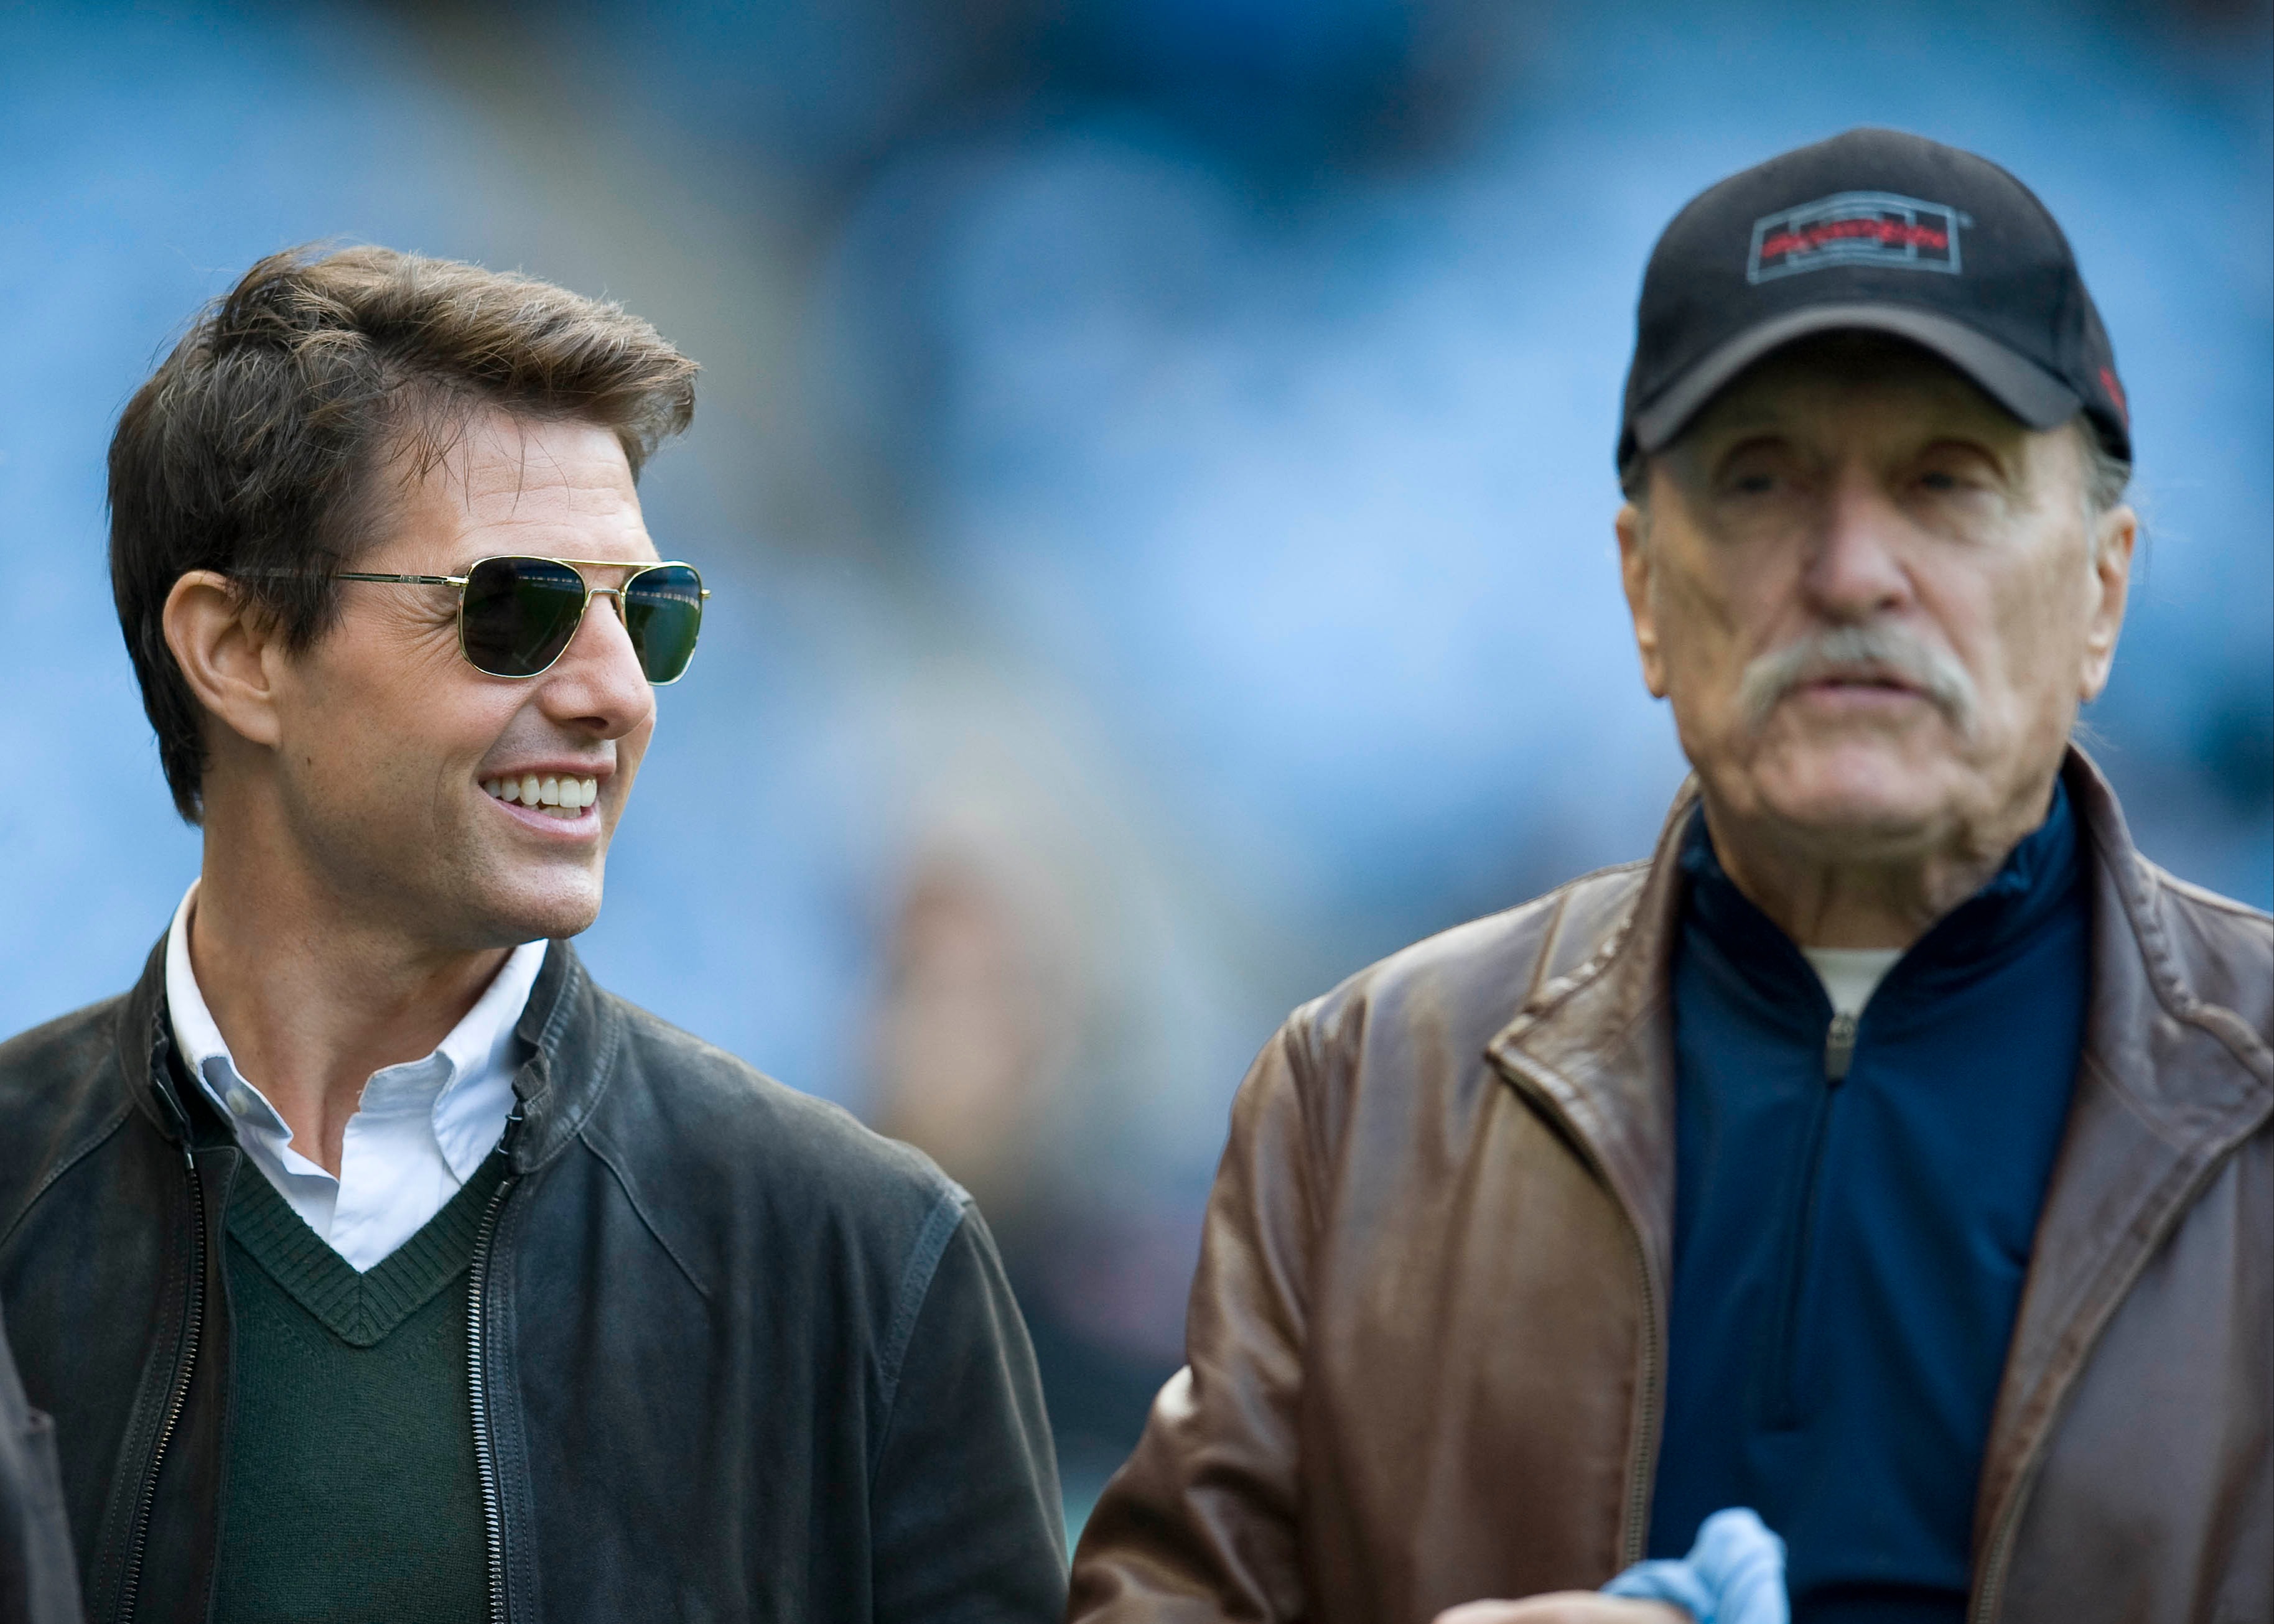 Hollywood legends Tom Cruise and Robert Duvall popped into the Etihad